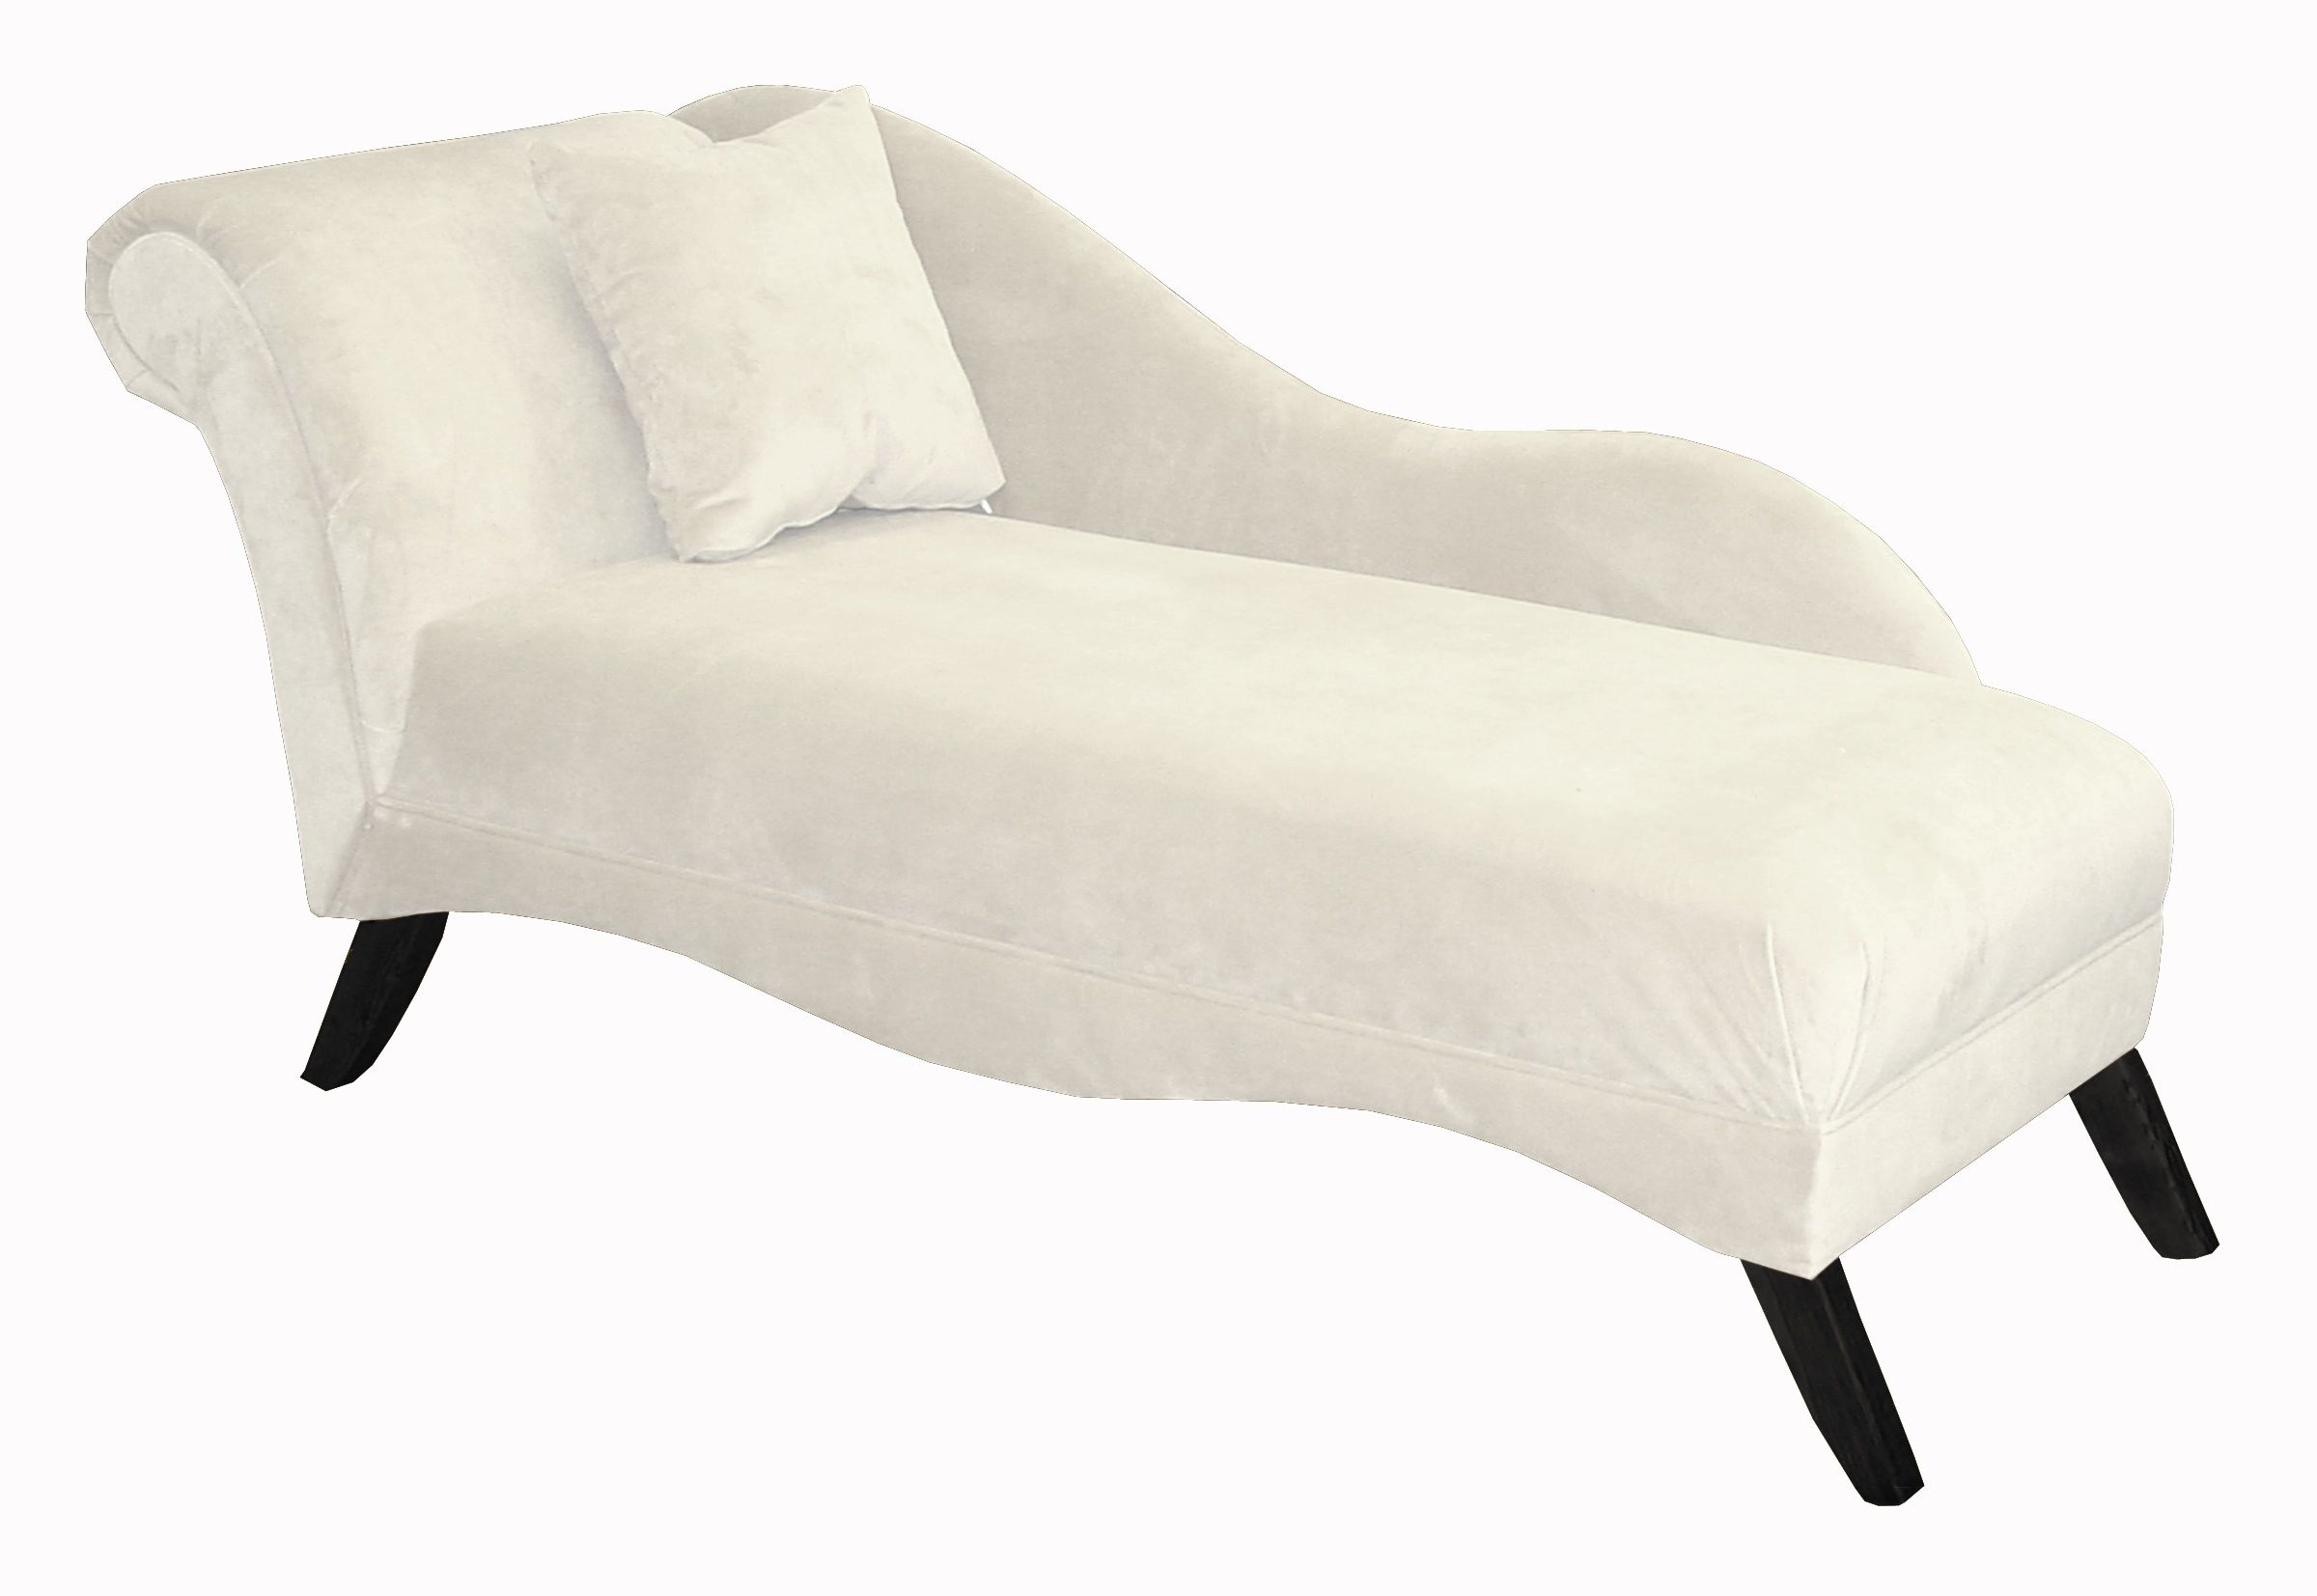 Google Image Result For Httpd3f8w3yx9w99q2cloudfront1357 With Regard To Sofa Lounge Chairs (View 7 of 14)